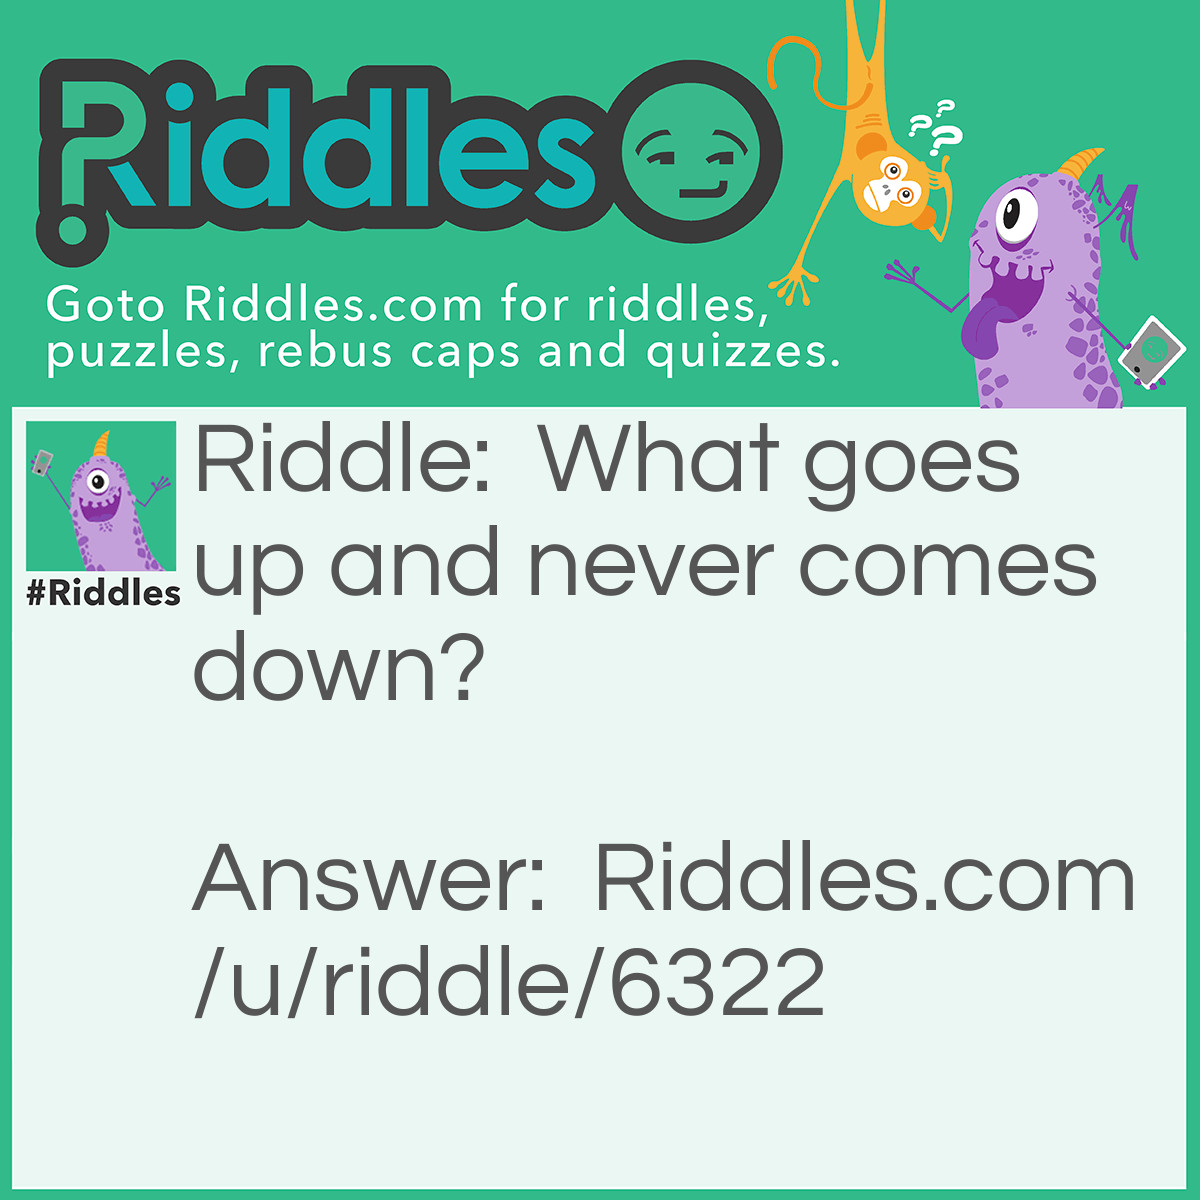 Riddle: What goes up and never comes down? Answer: Age.